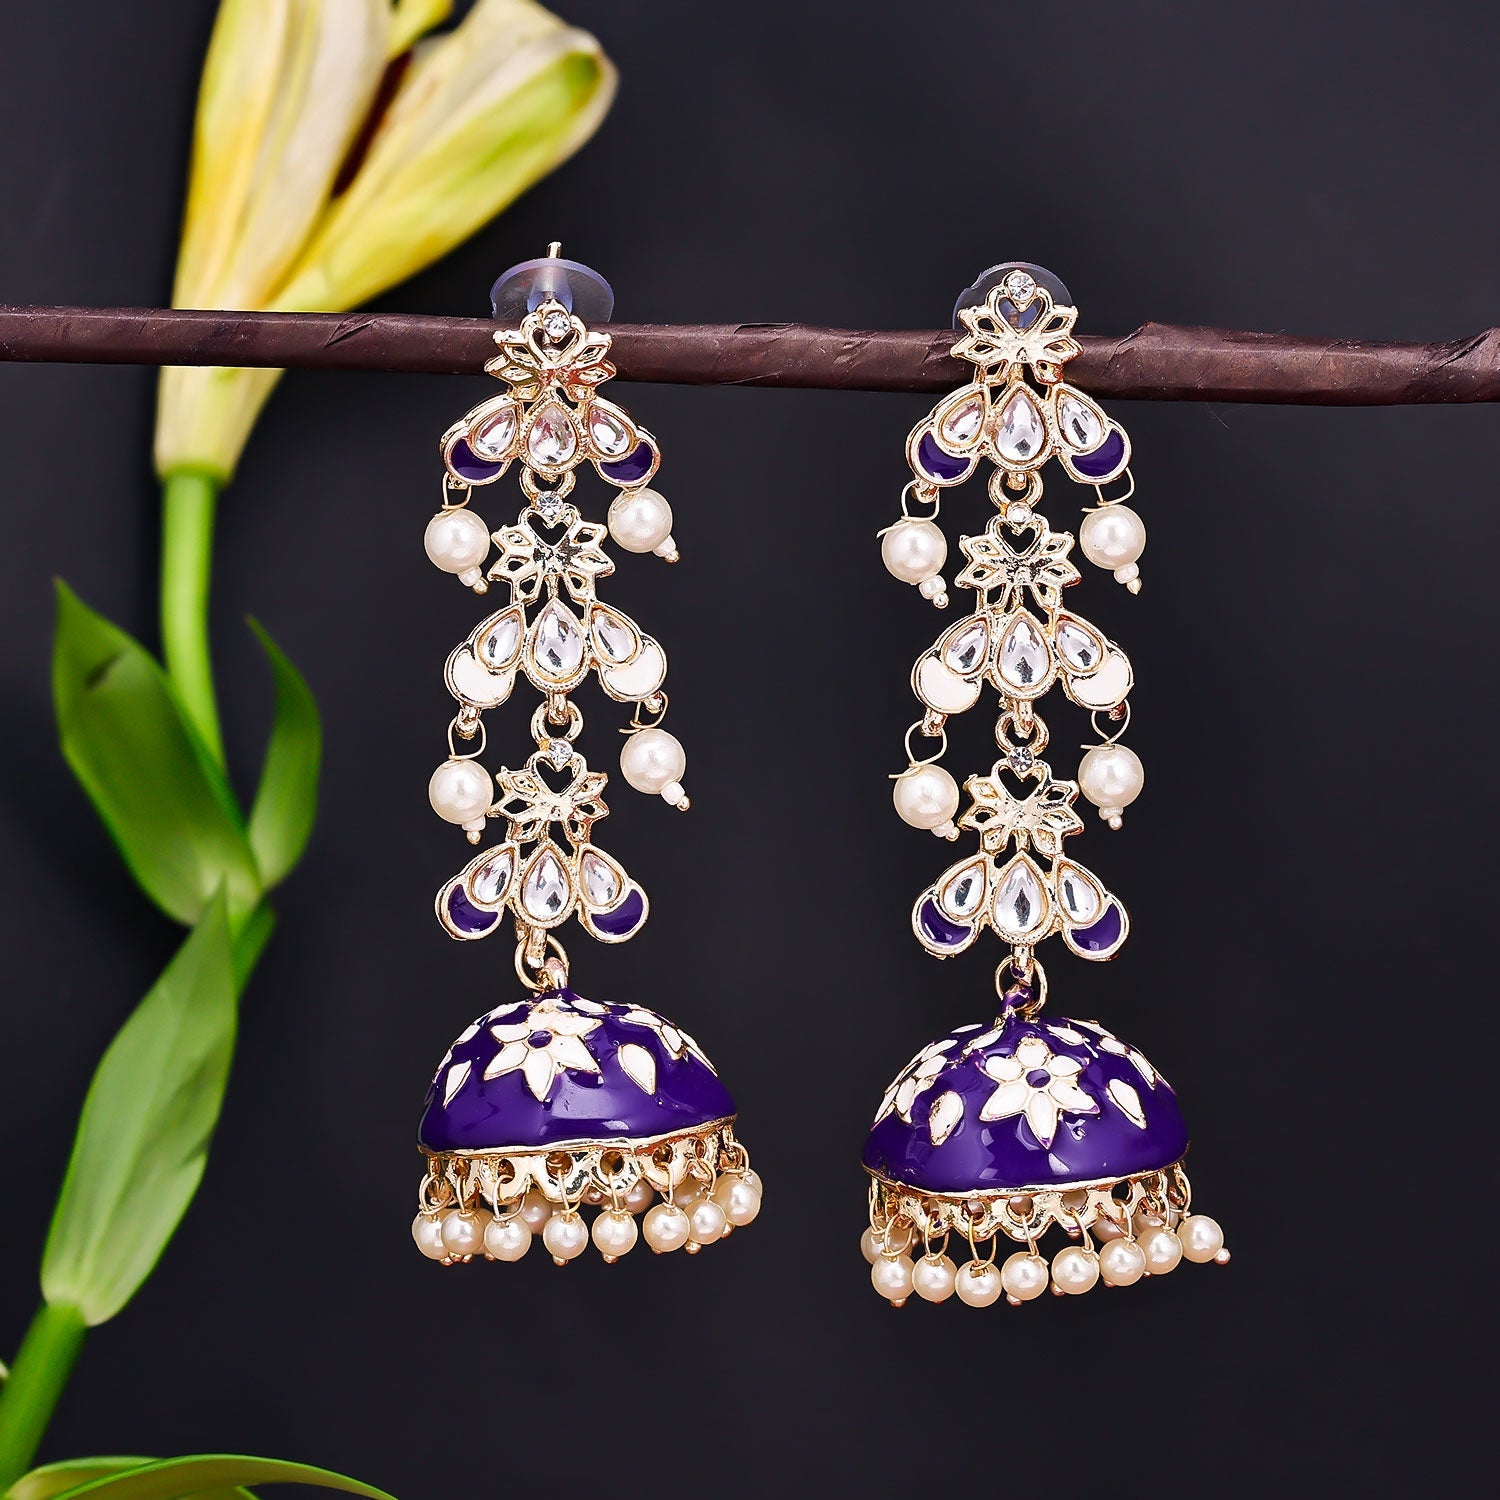 Light purple / Lavender colour jhumka drop wali style earrings in Kund –  Timeless desires collection